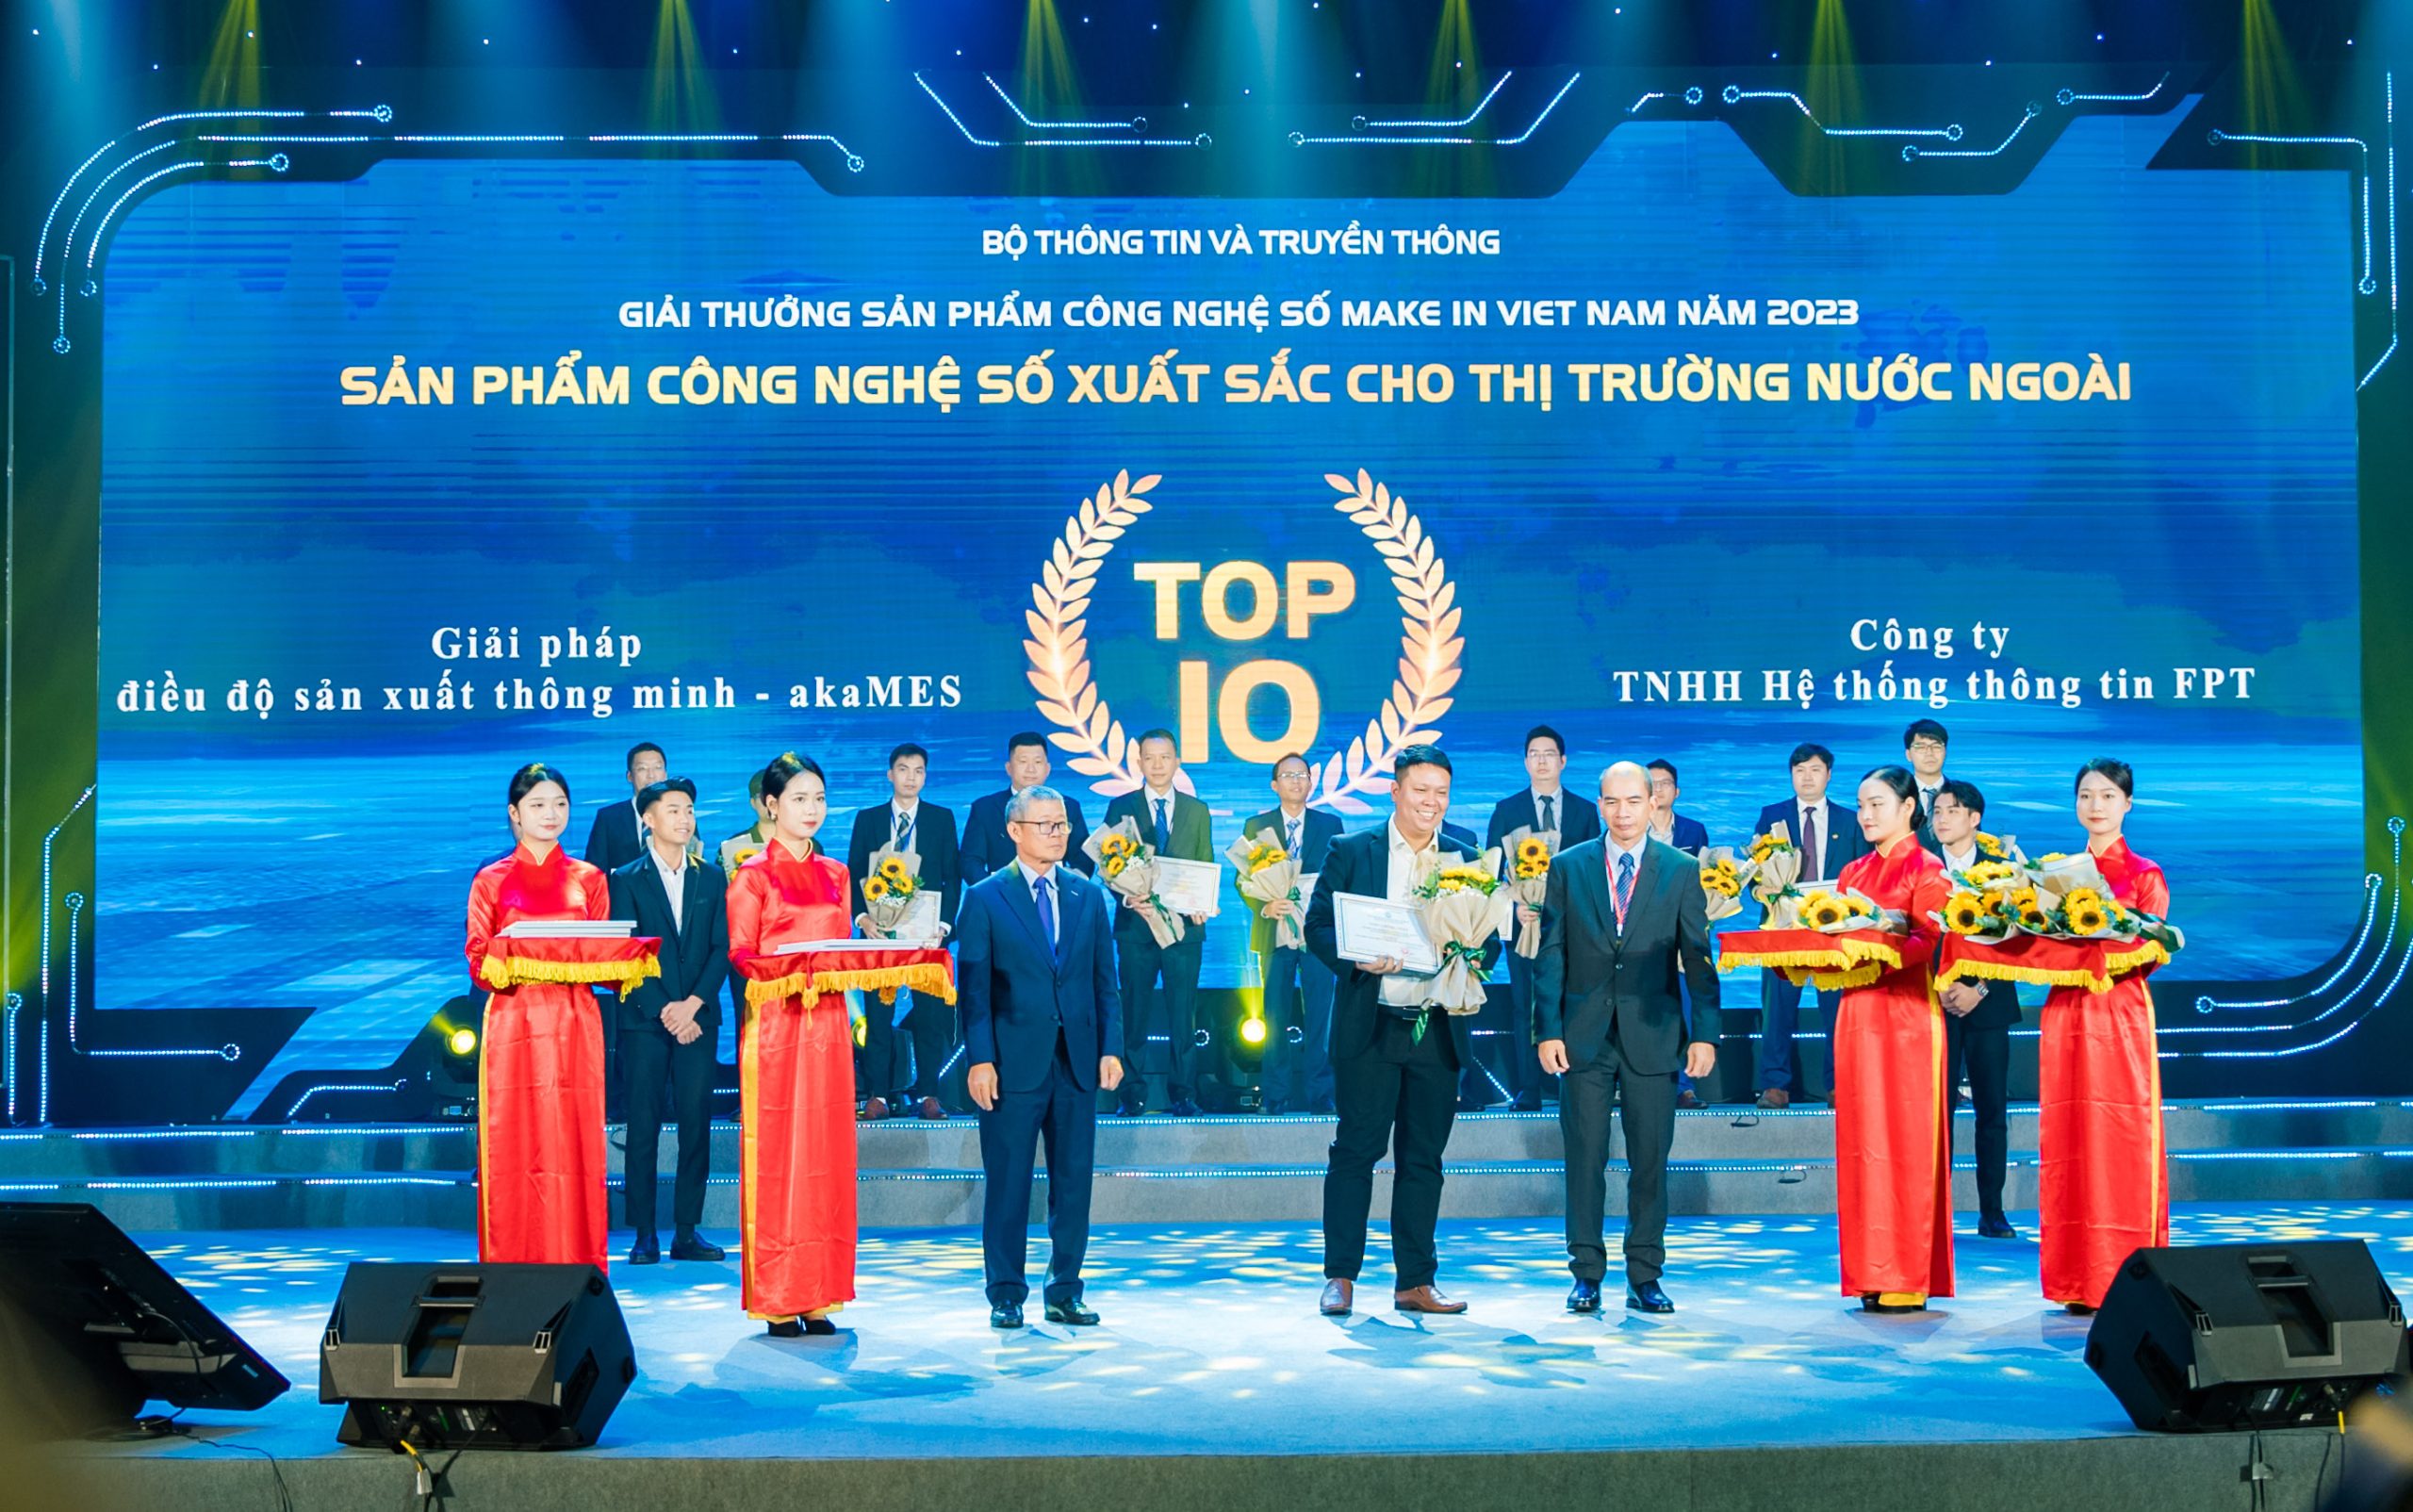 2023 Make in Viet Nam Digital Technology Product Awards – Top 10  Excellent Digital Technology Products for Overseas Markets category – Intelligent Manufacturing Execution System (akaMES)